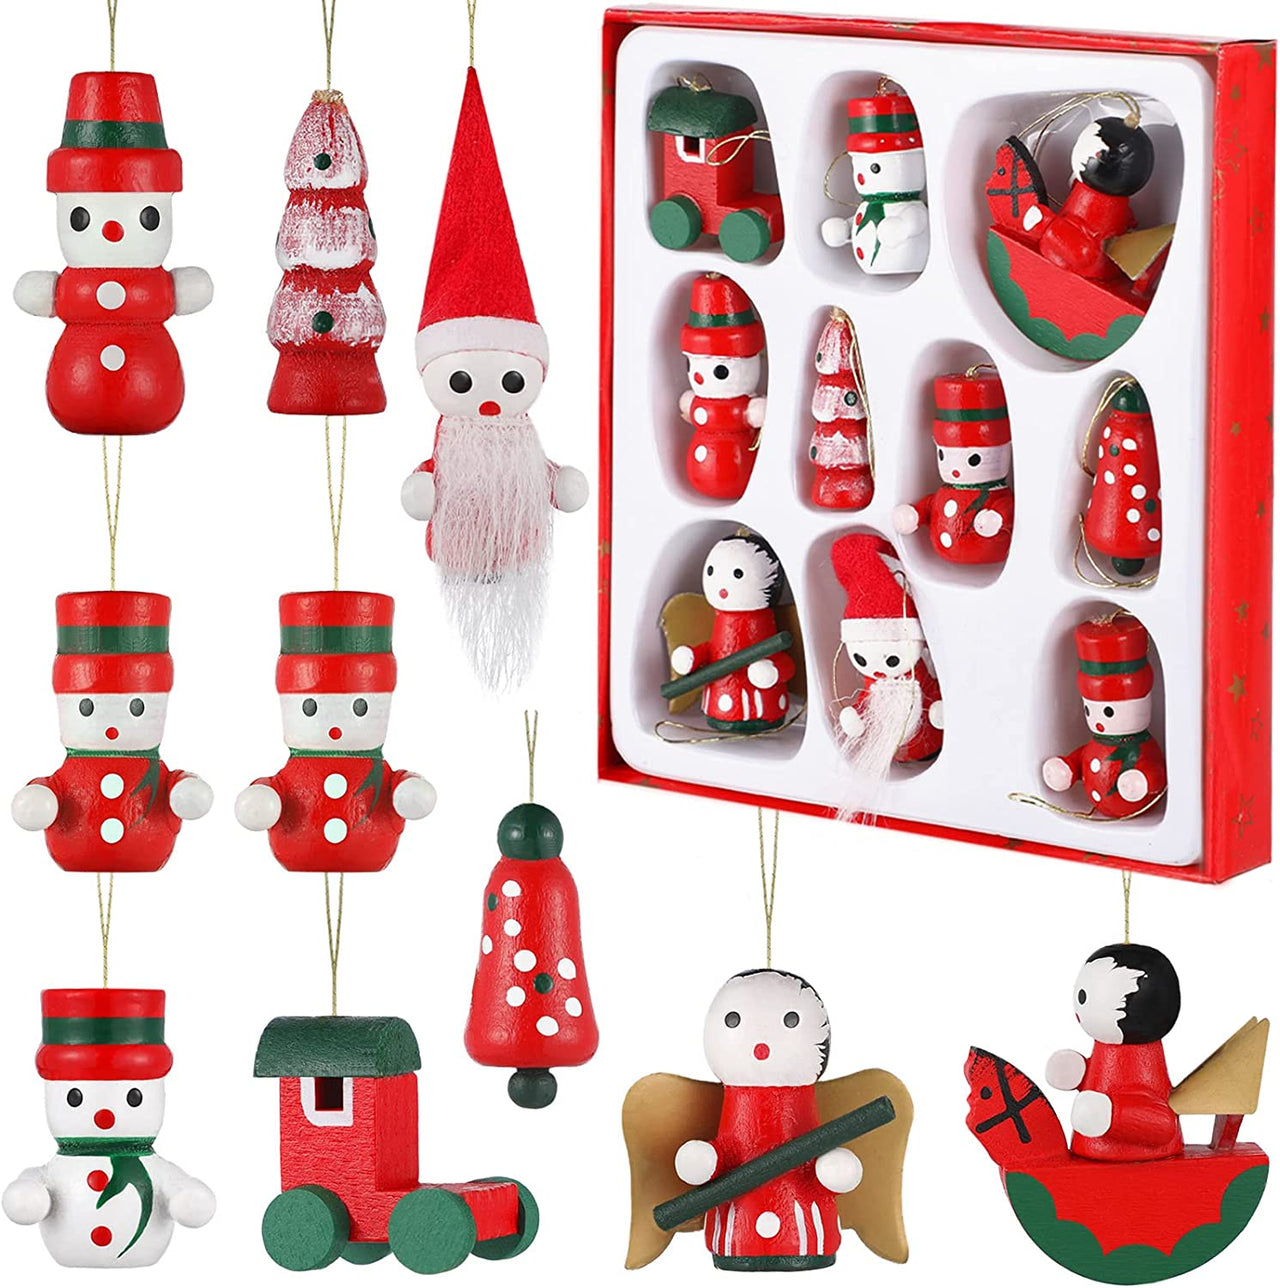 10 Pieces Christmas Ornaments Set Wood Christmas Ornaments Snowman Stocking Christmas Tree Decorations Wooden Hanging Xmas Ornaments for Holiday Party Supplies